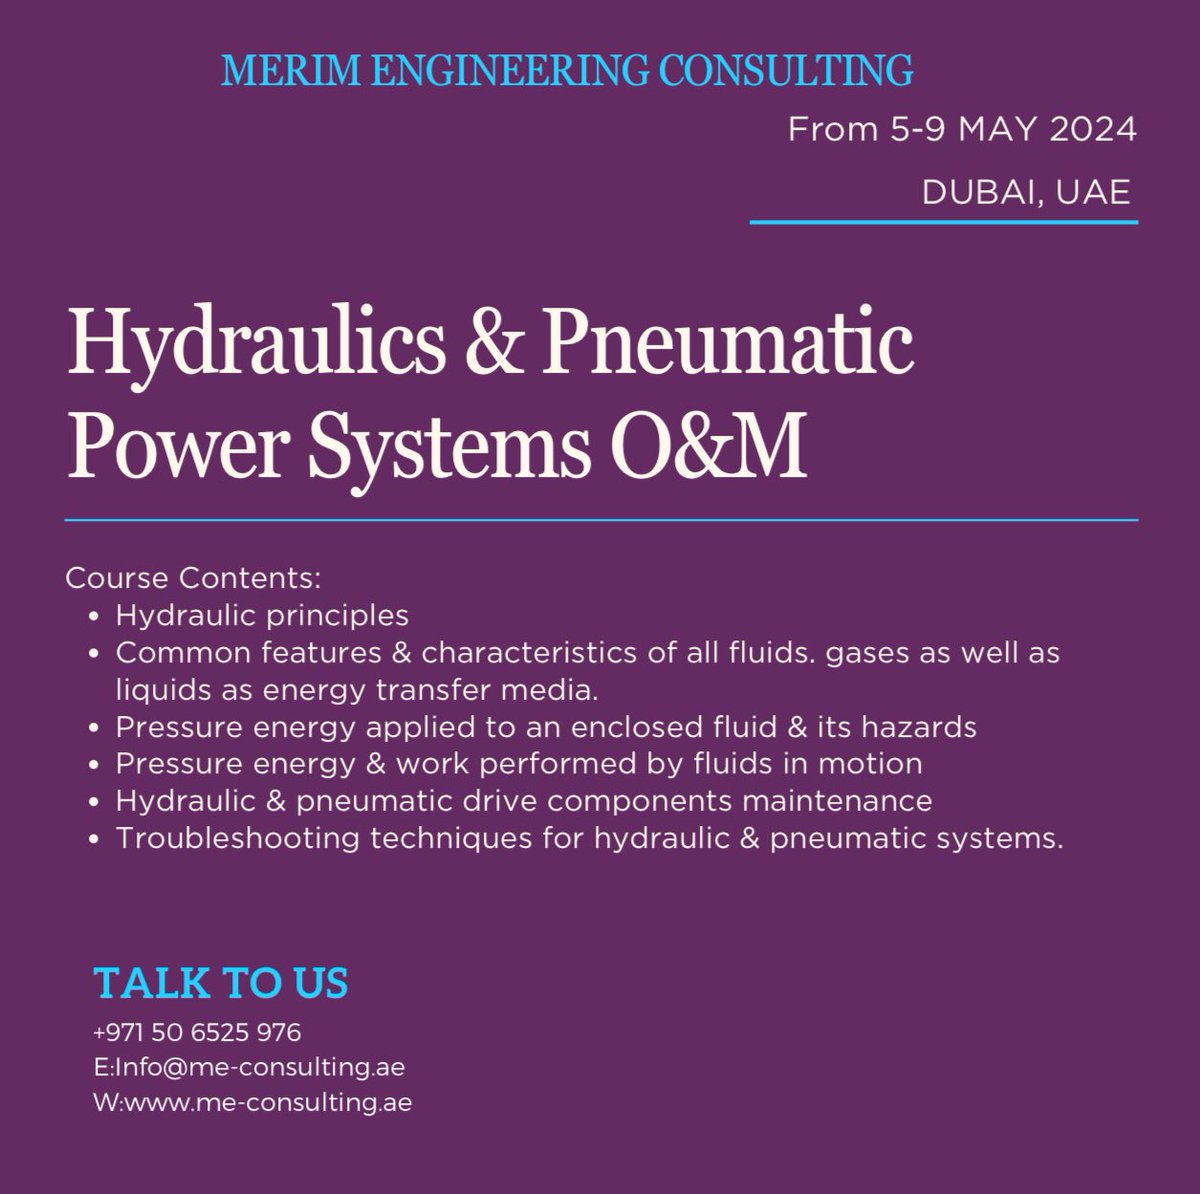 Hydraulics & Pneumatic Power Systems O&M - Training will start from 5-9 May, 2024 in Dubai, UAE for more details and registration please email us at info@me-consulting.ae and reach us by WhatsApp: 971506525976